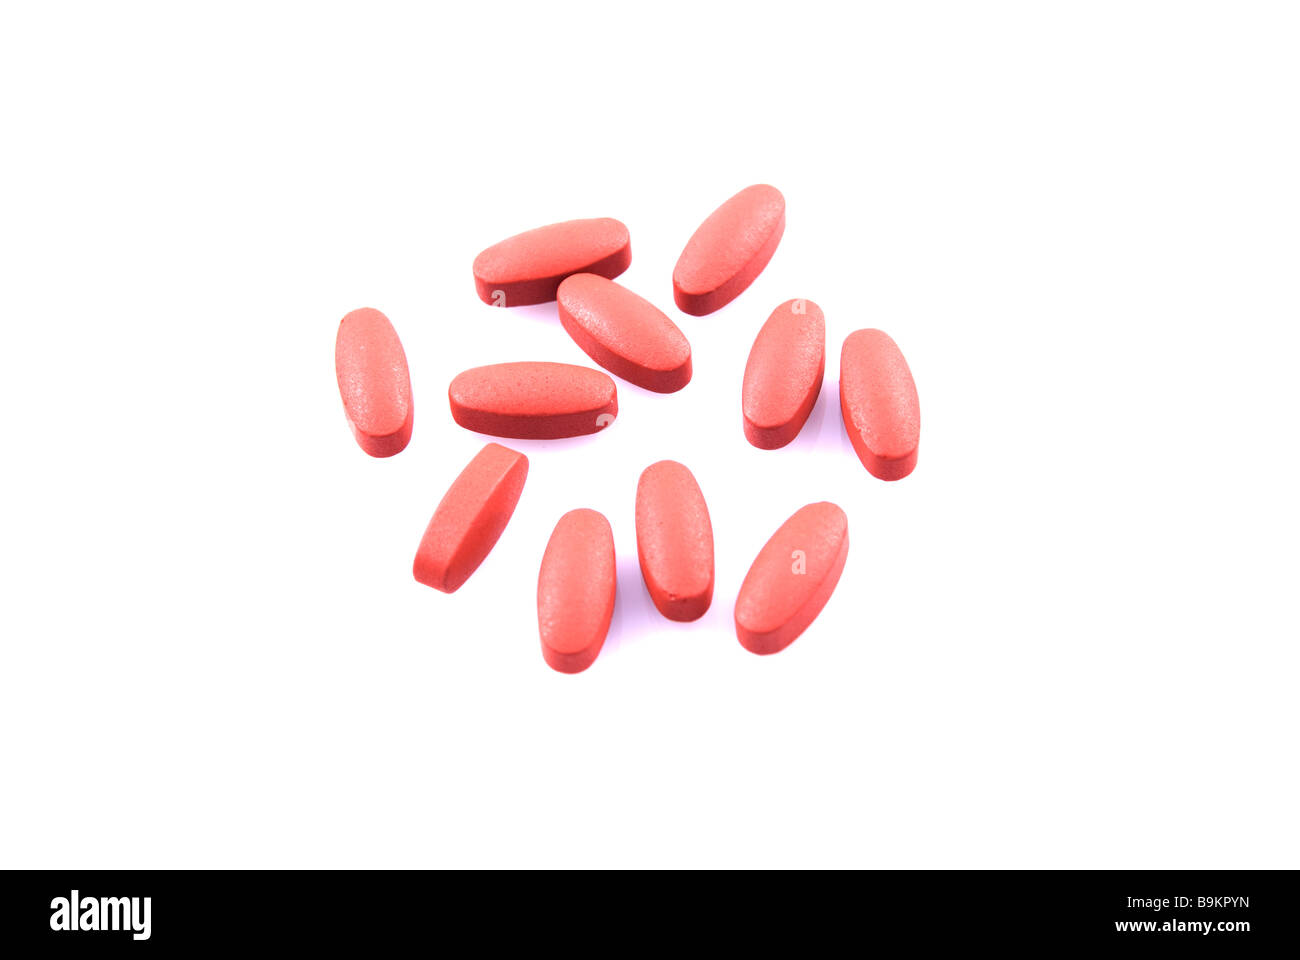 Red pills isolated against a white background Stock Photo